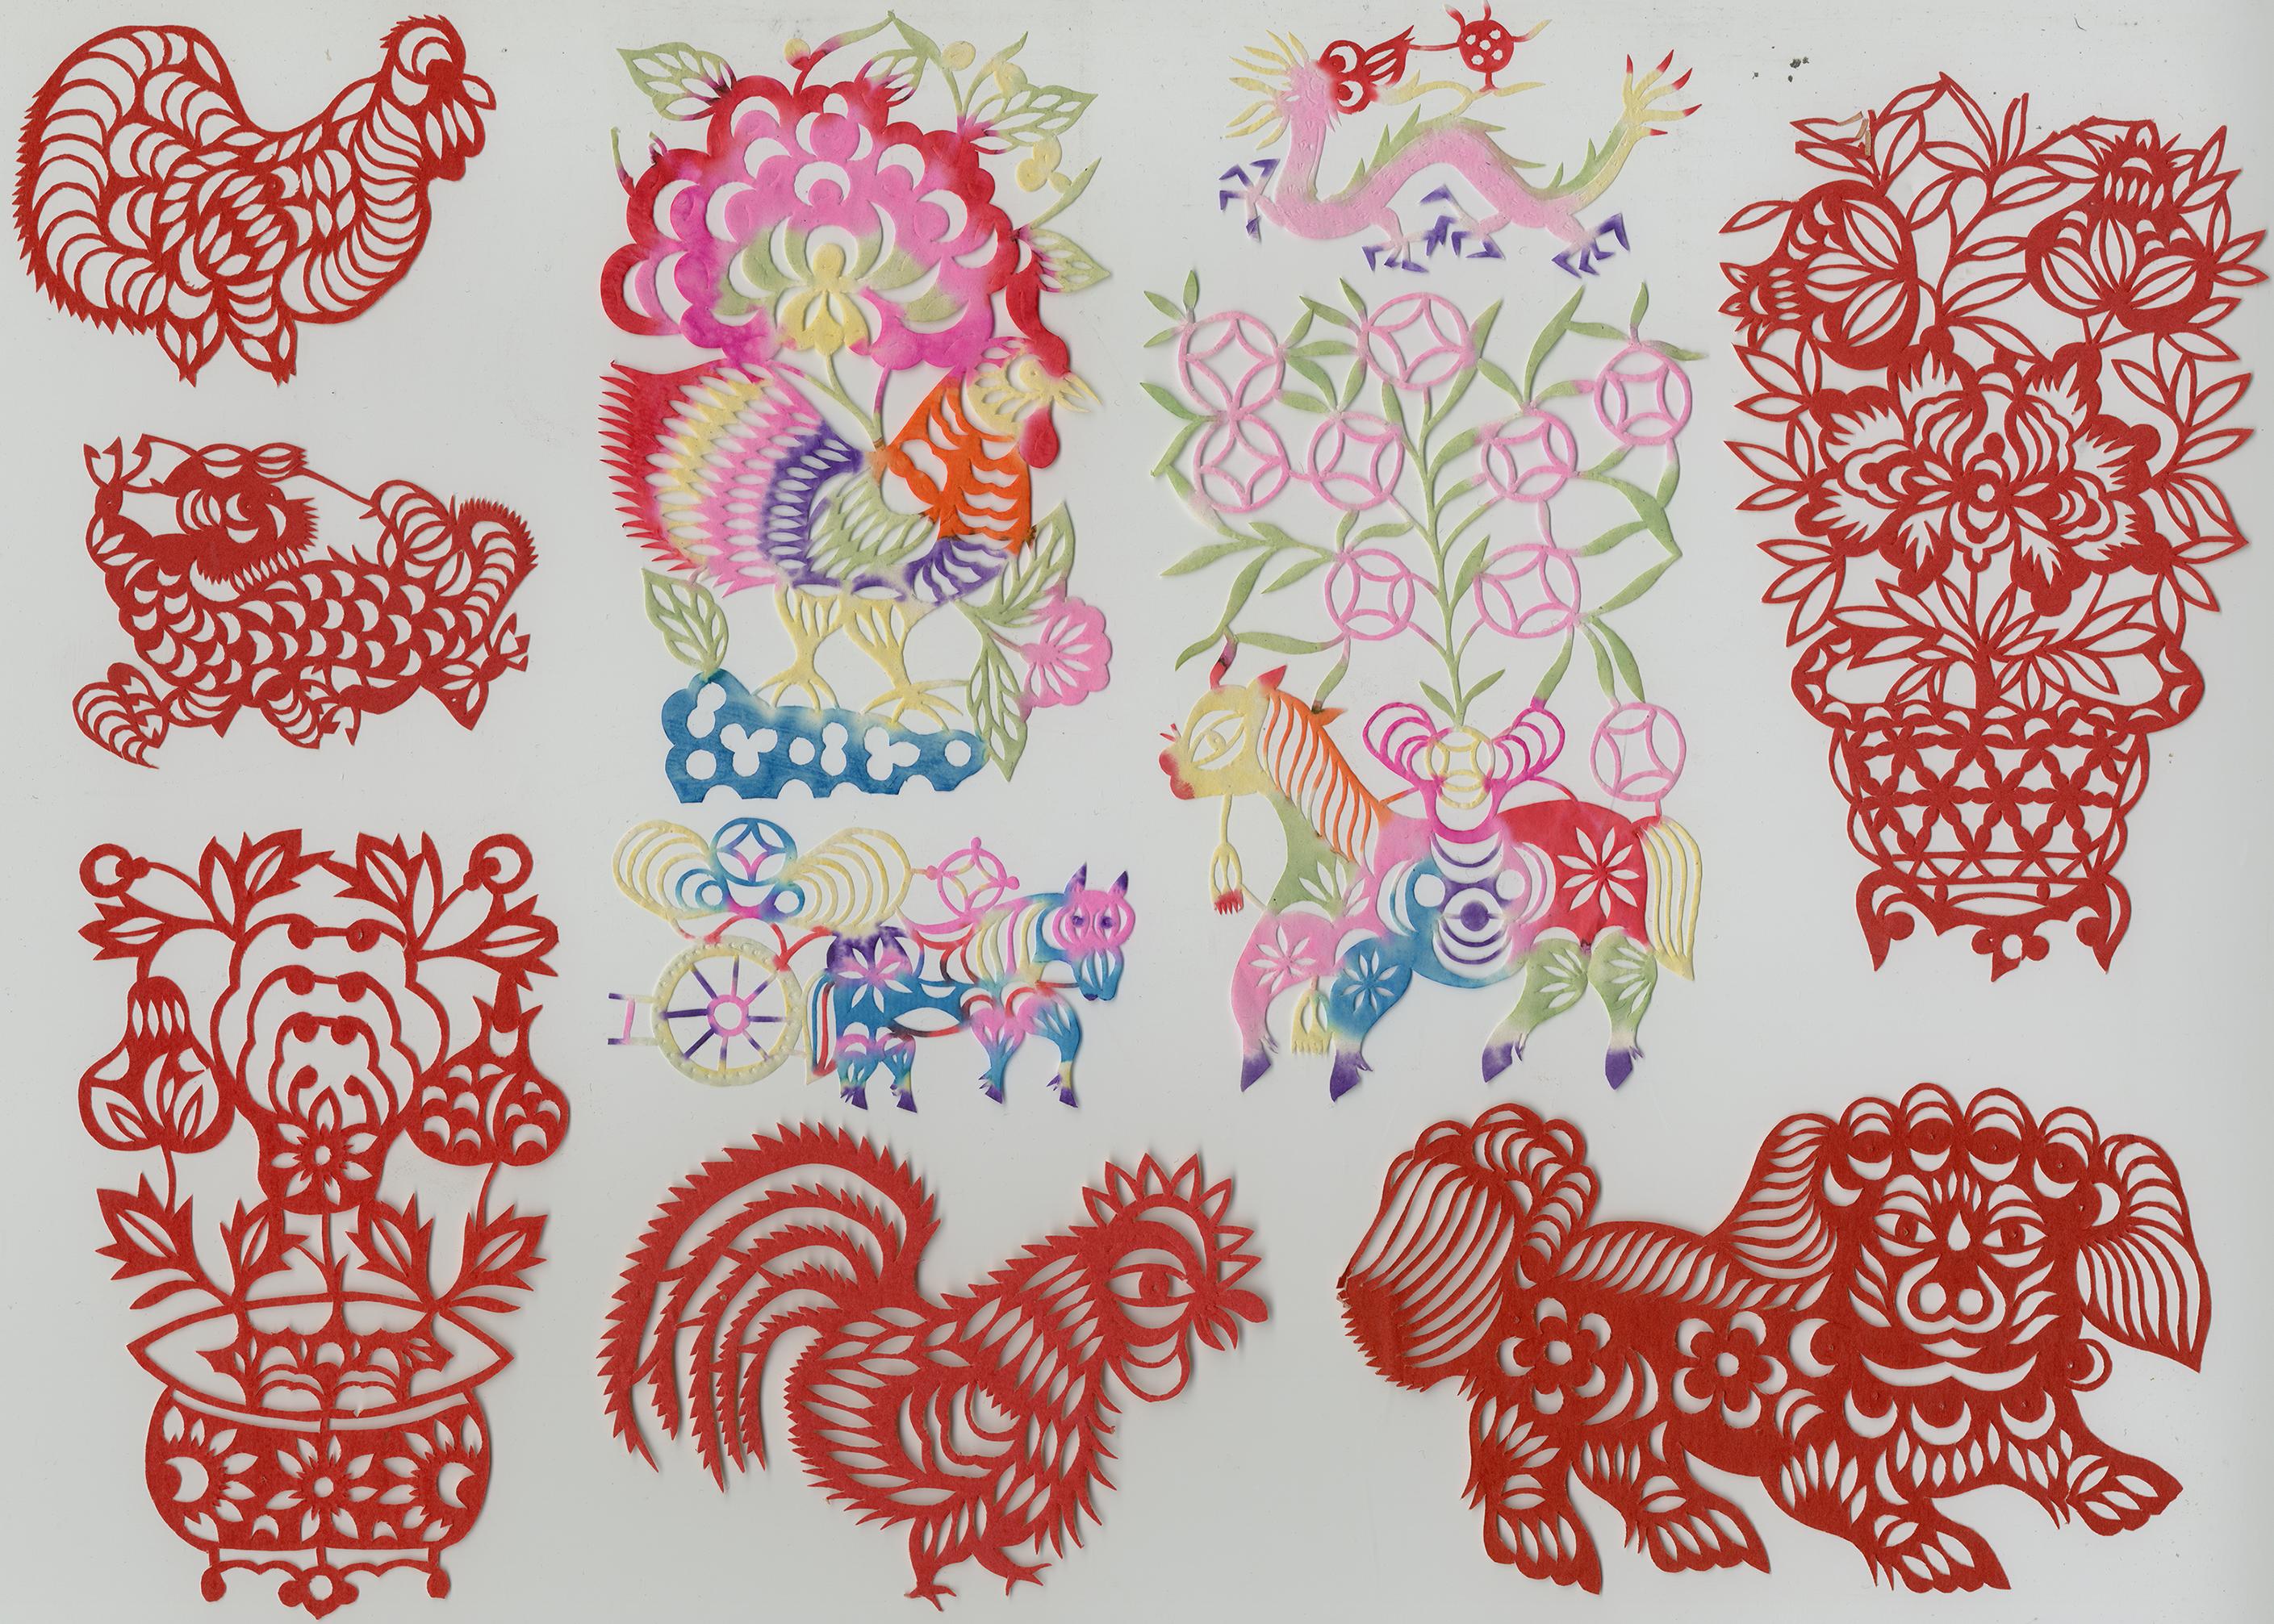 Assorted Chinese paper cuttings organized into a grid with the red cuttings along the border of the grid and the multicolored cuttings in the middle